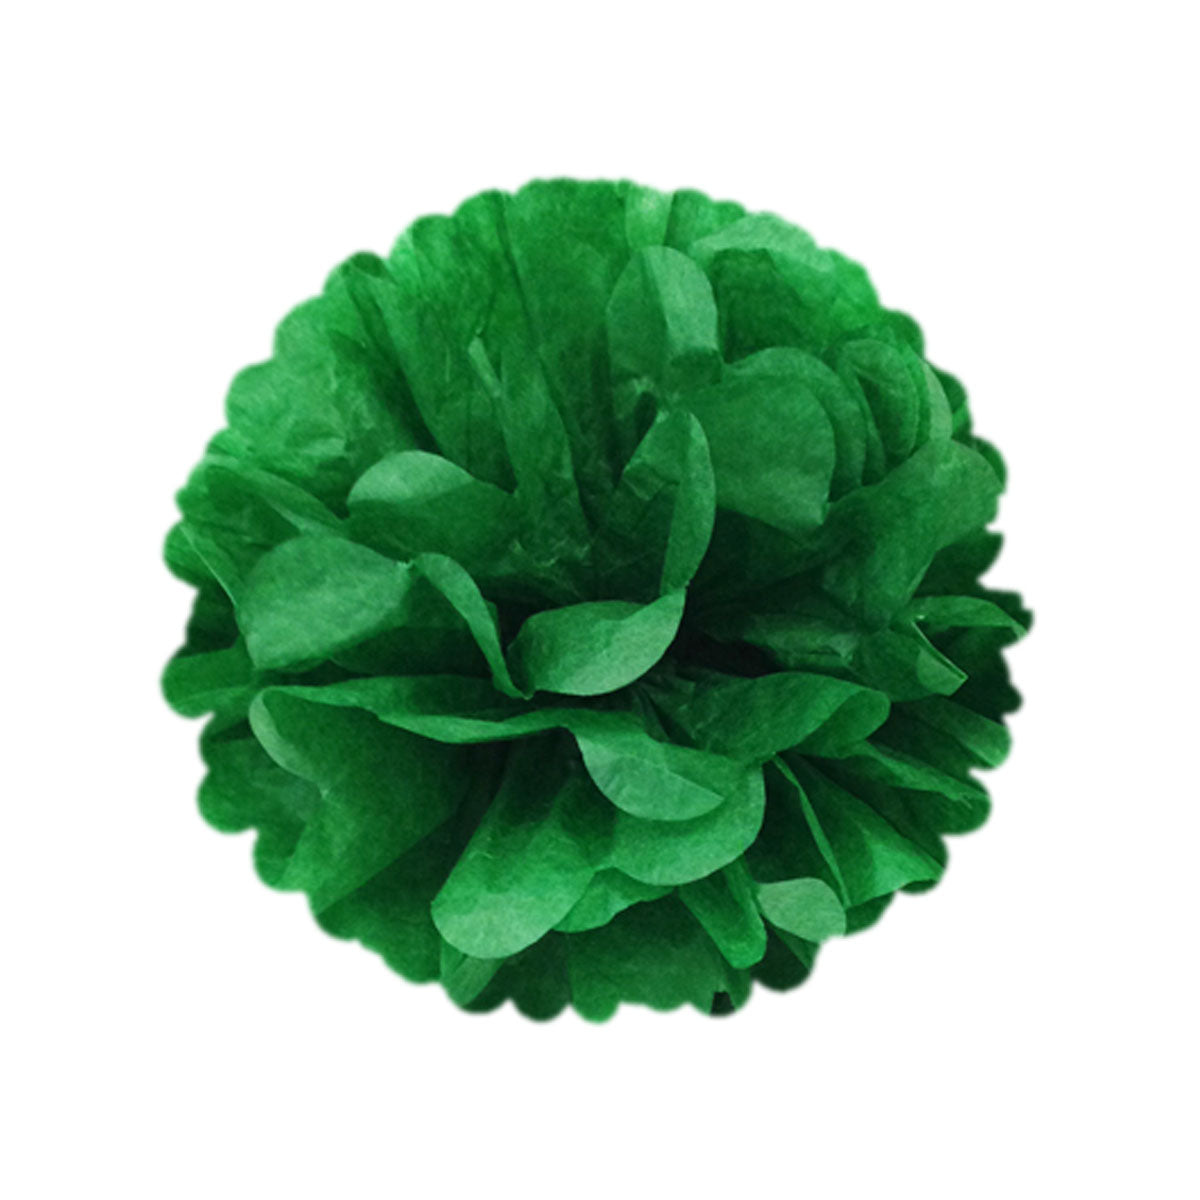 Wrapables 14" Set of 3 Tissue Pom Poms Party Decorations